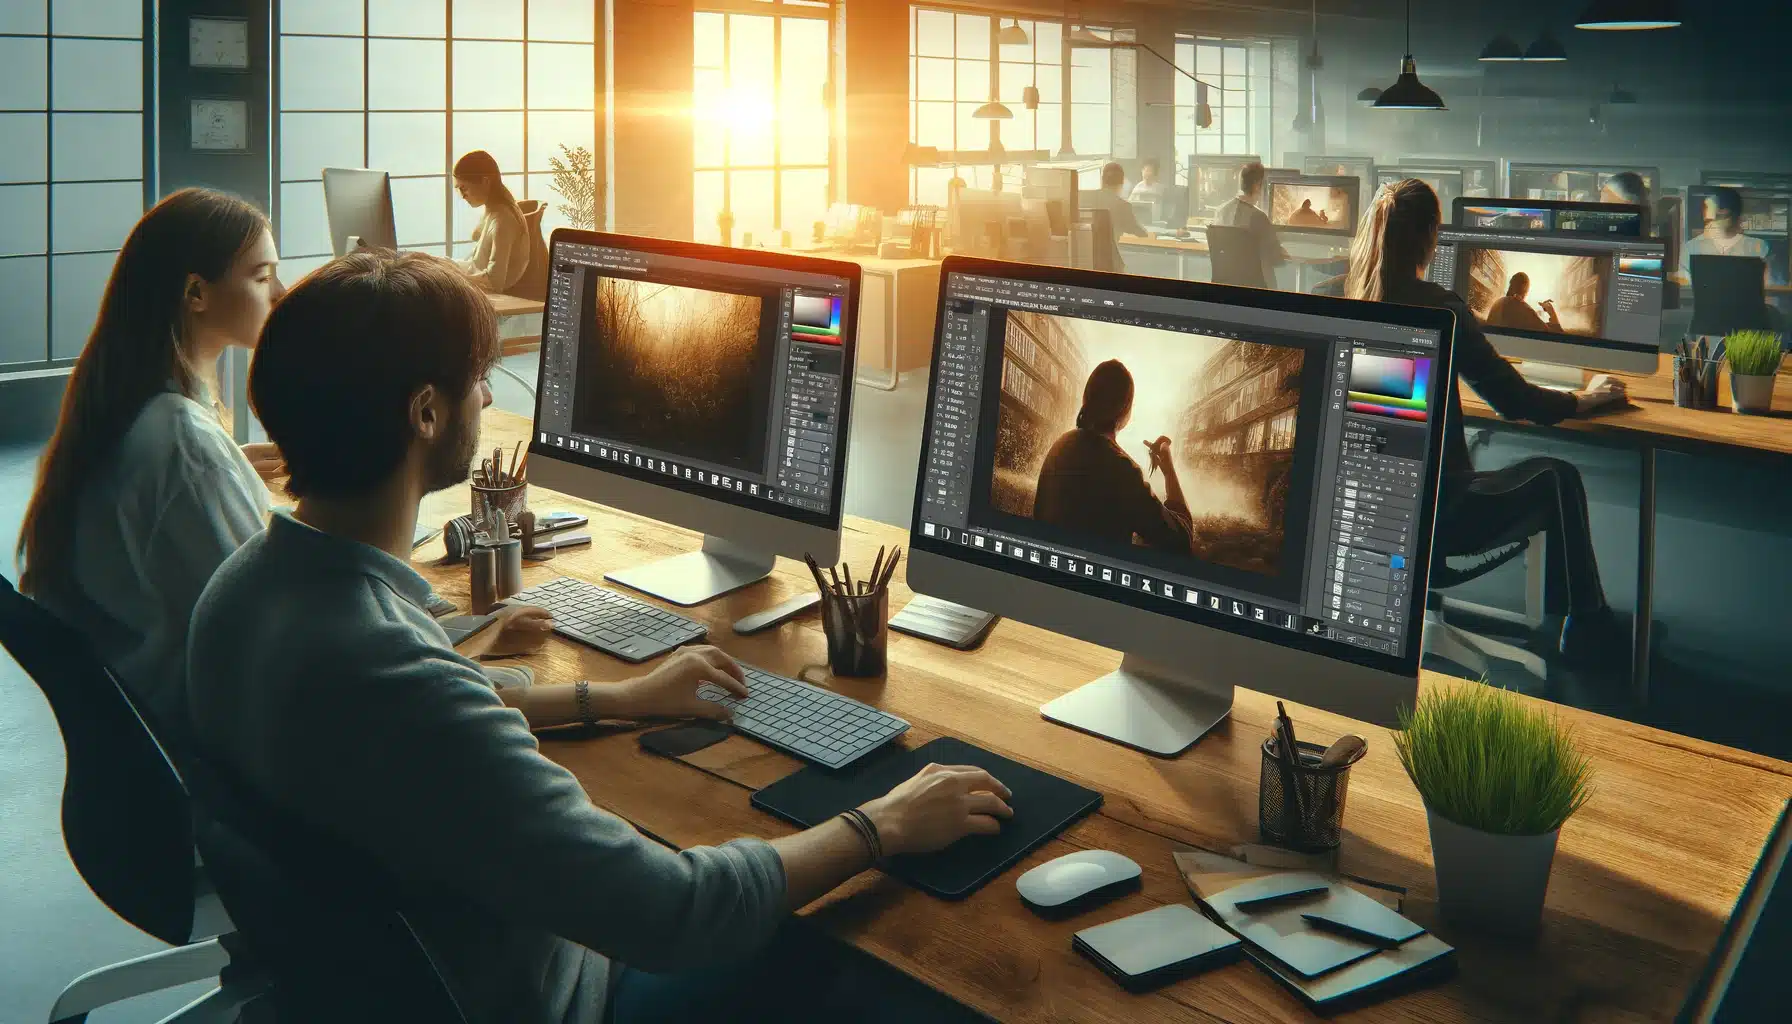 Two professionals in a modern office editing farinaceous Portraits in PS on their desktop computers, showcasing a collaborative and technology-driven workspace.